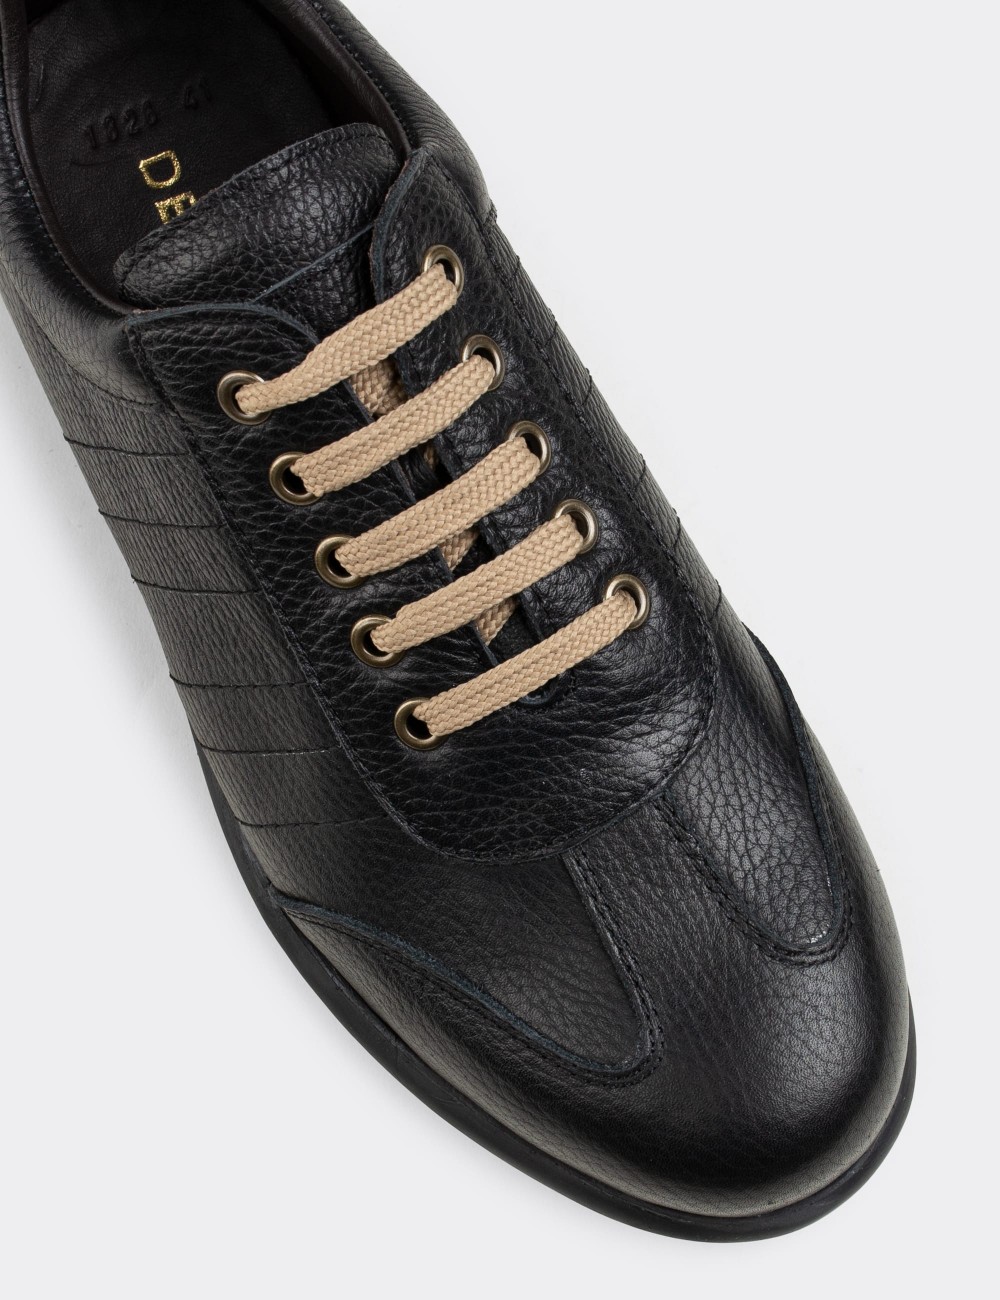 Black  Leather Lace-up Shoes - 01826MSYHC03